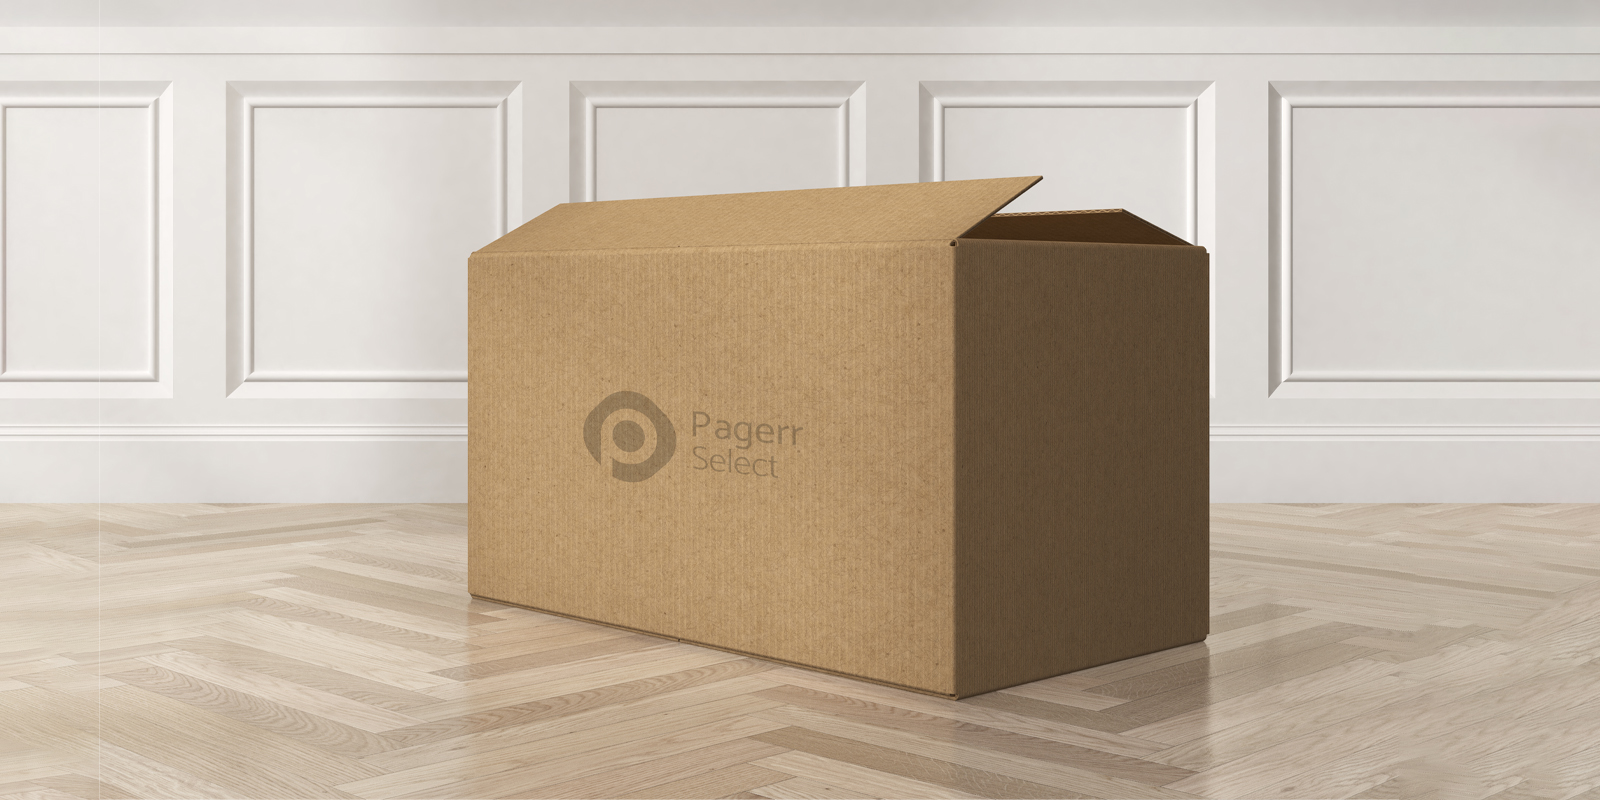 Moving boxes in Paris - Print with Pagerr